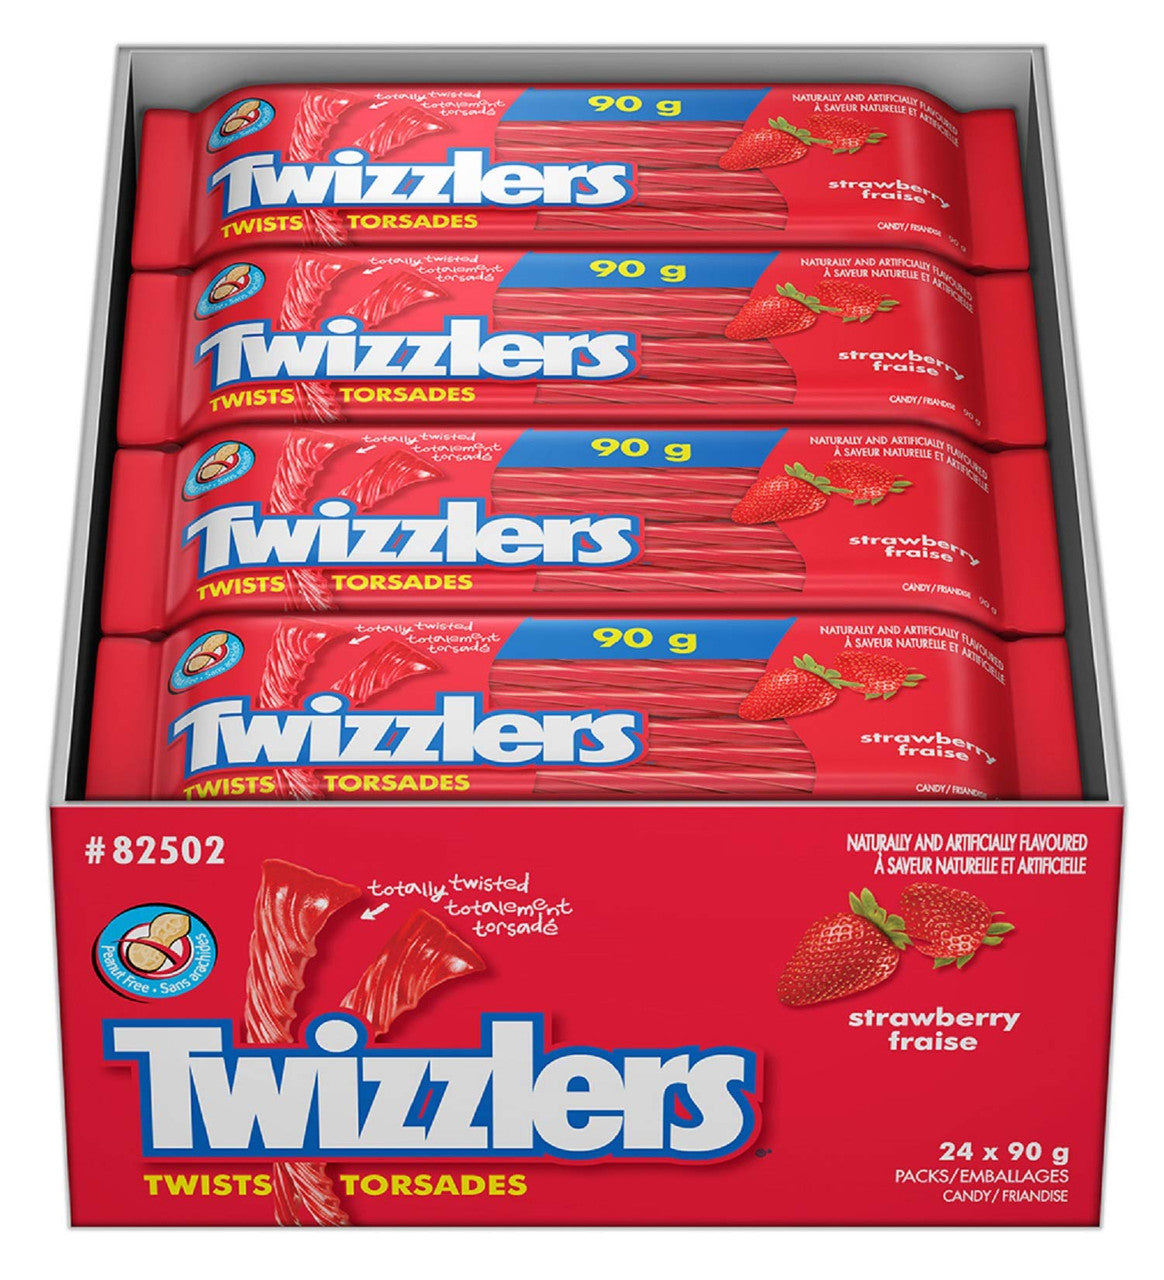 TWIZZLERS Licorice Candy, Strawberry Twizzelators, 24ct/90g bags, (Imported from Canada)